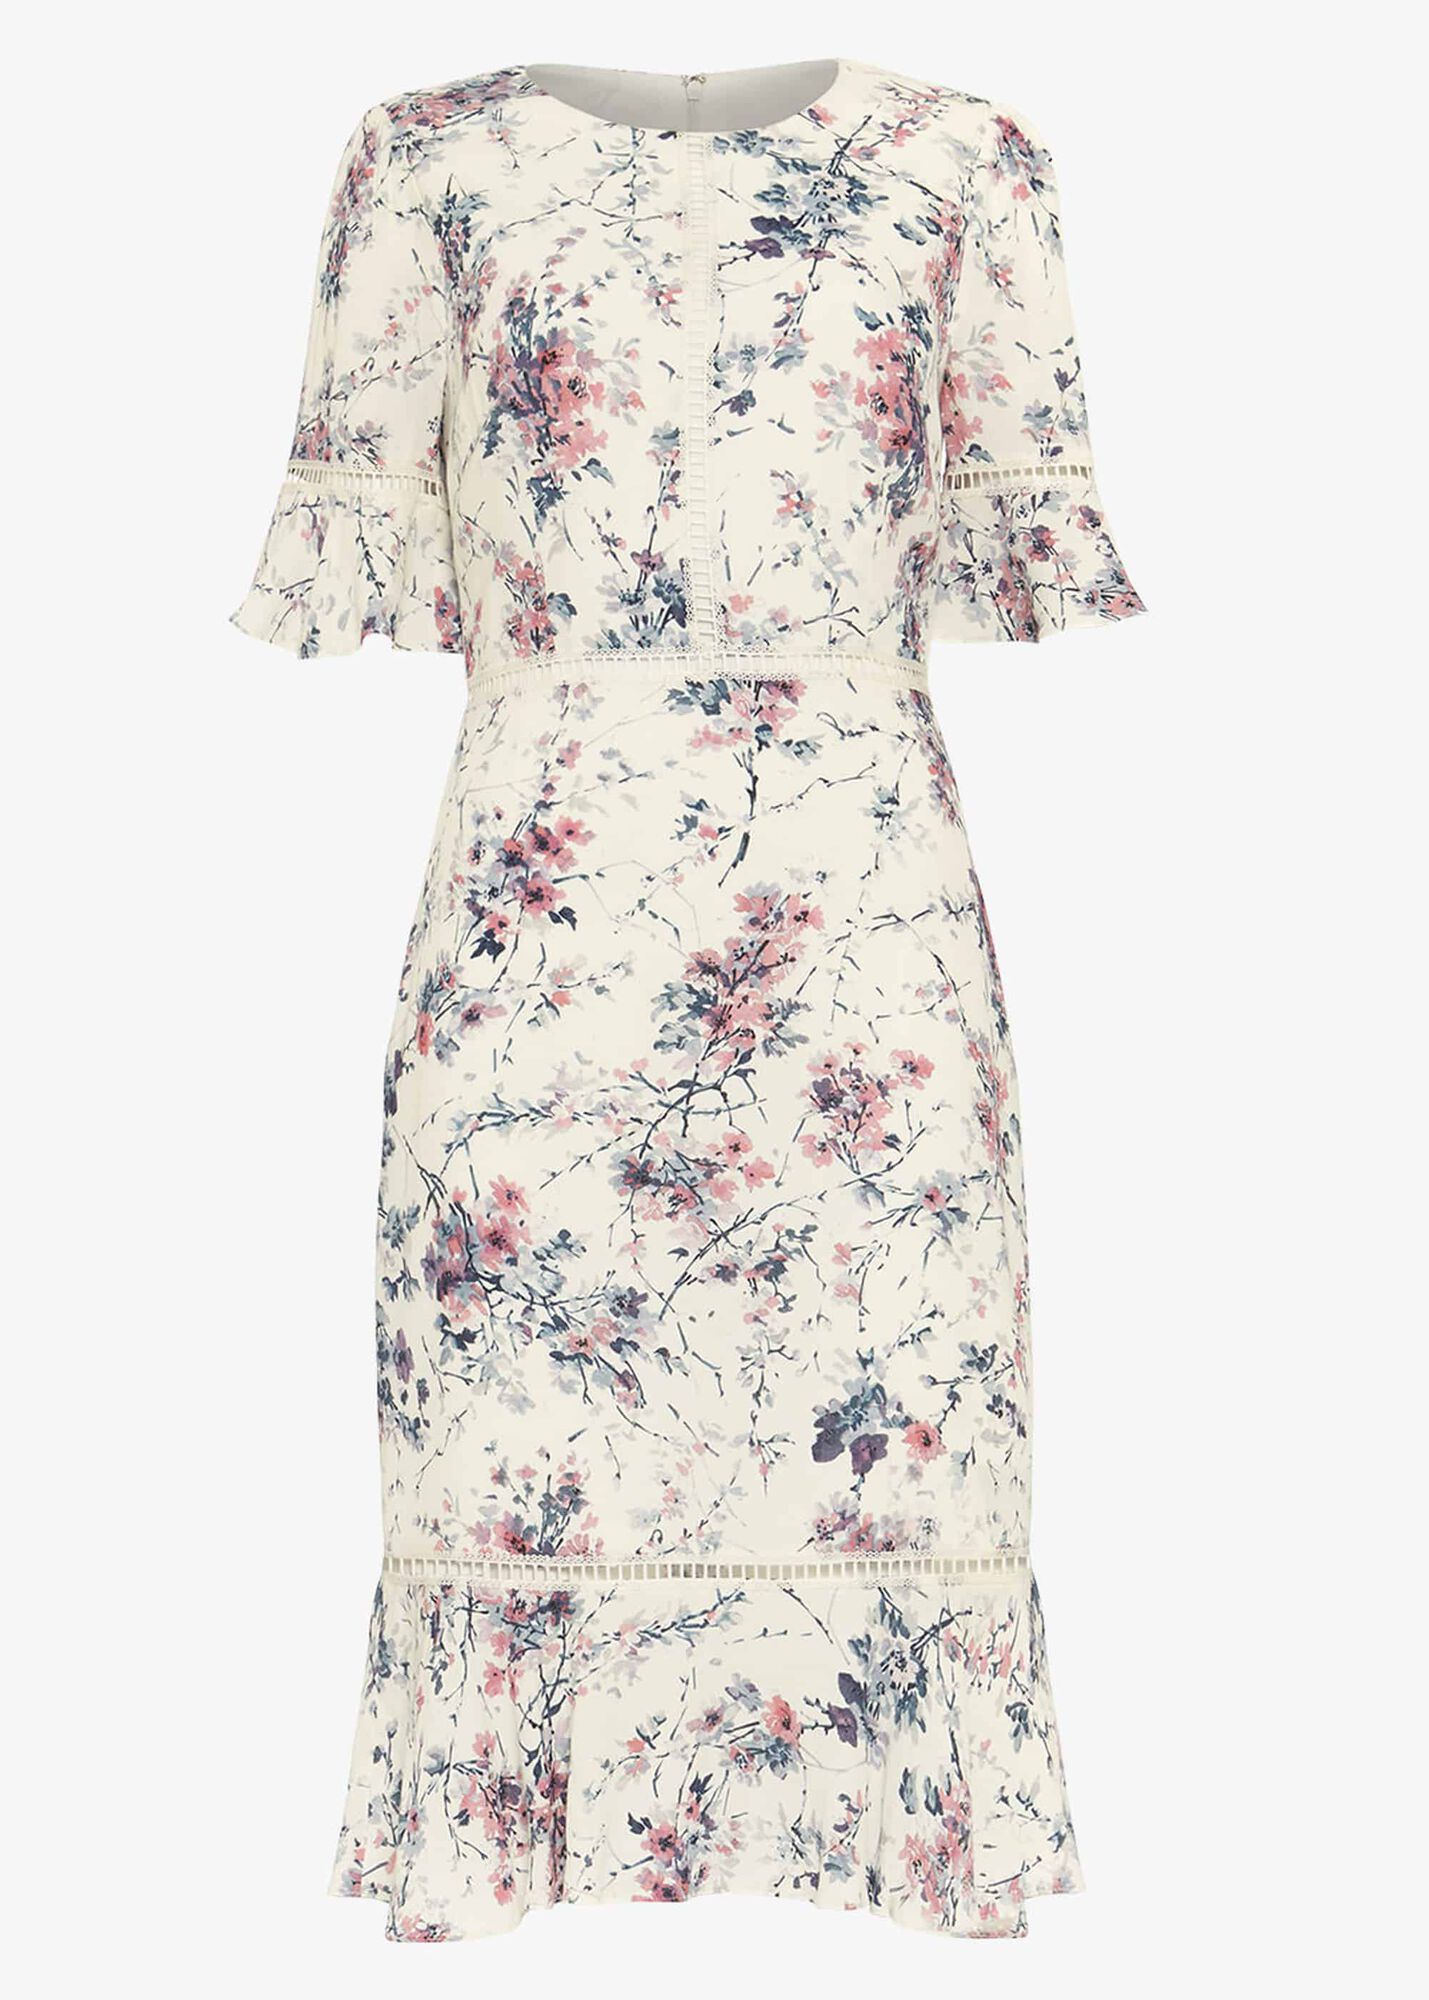 Paloma Floral Print Dress | Phase Eight